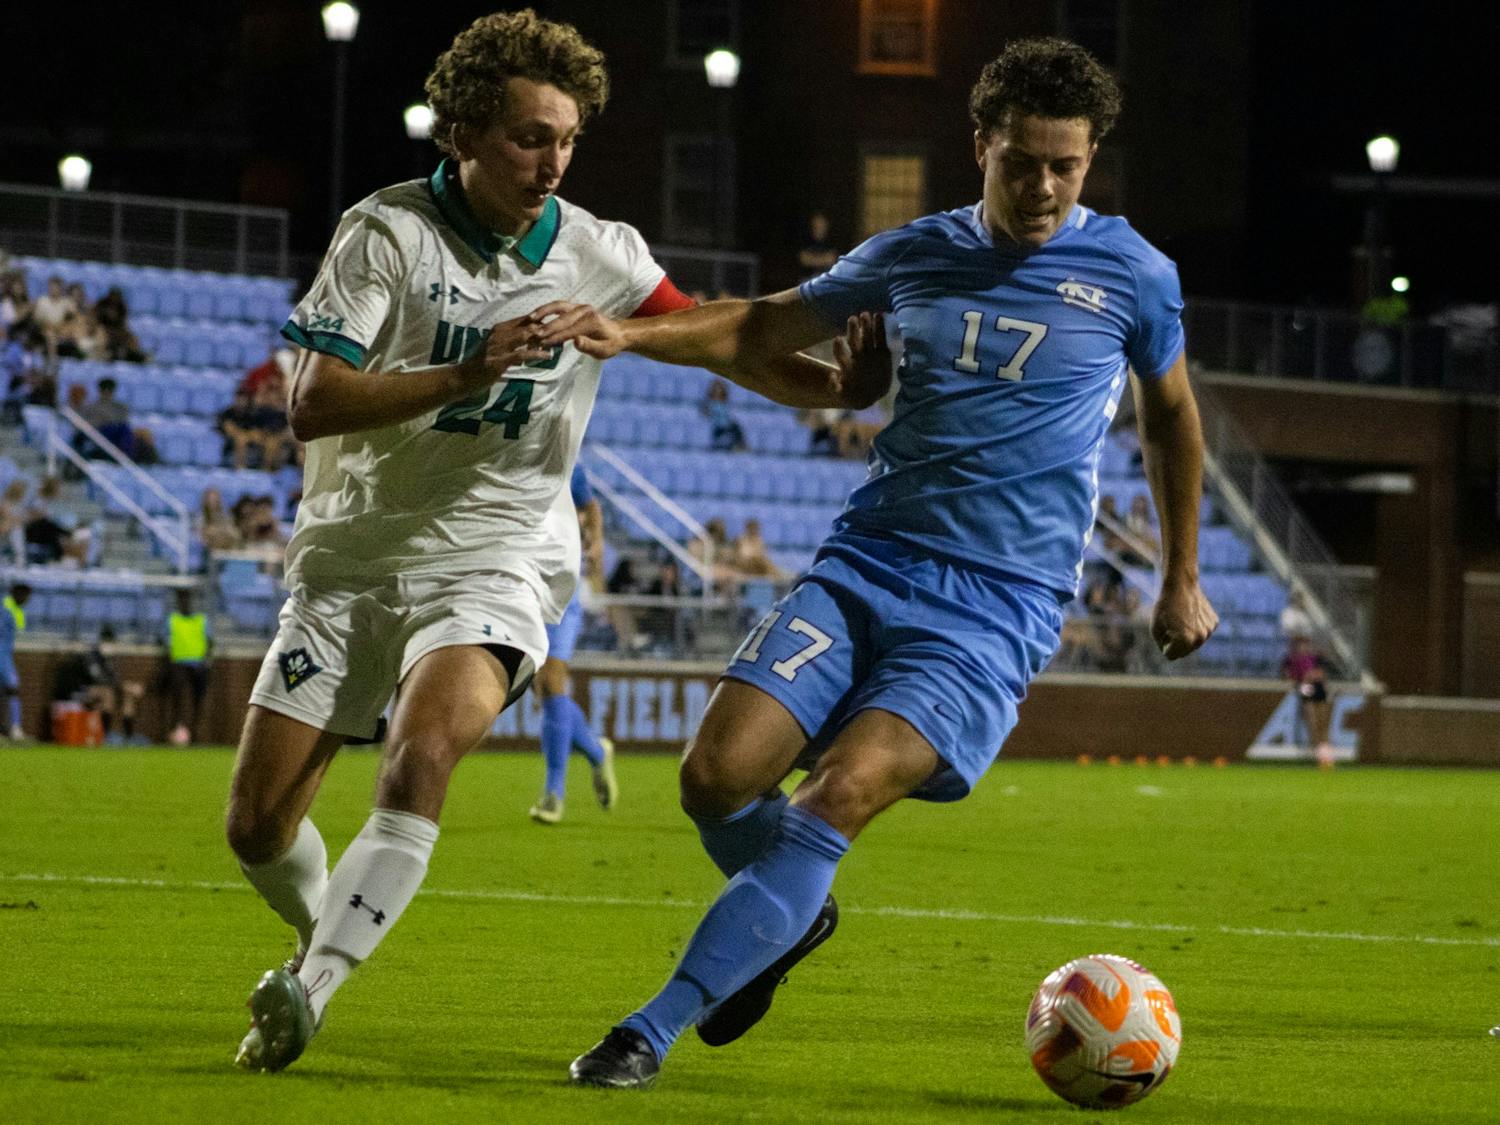 UNC senior midfielder Cameron Fisher (17) protects the ball during the Tar Heels' game against UNCW on Tuesday, Sept. 20, 2022, at Dorrance Field.